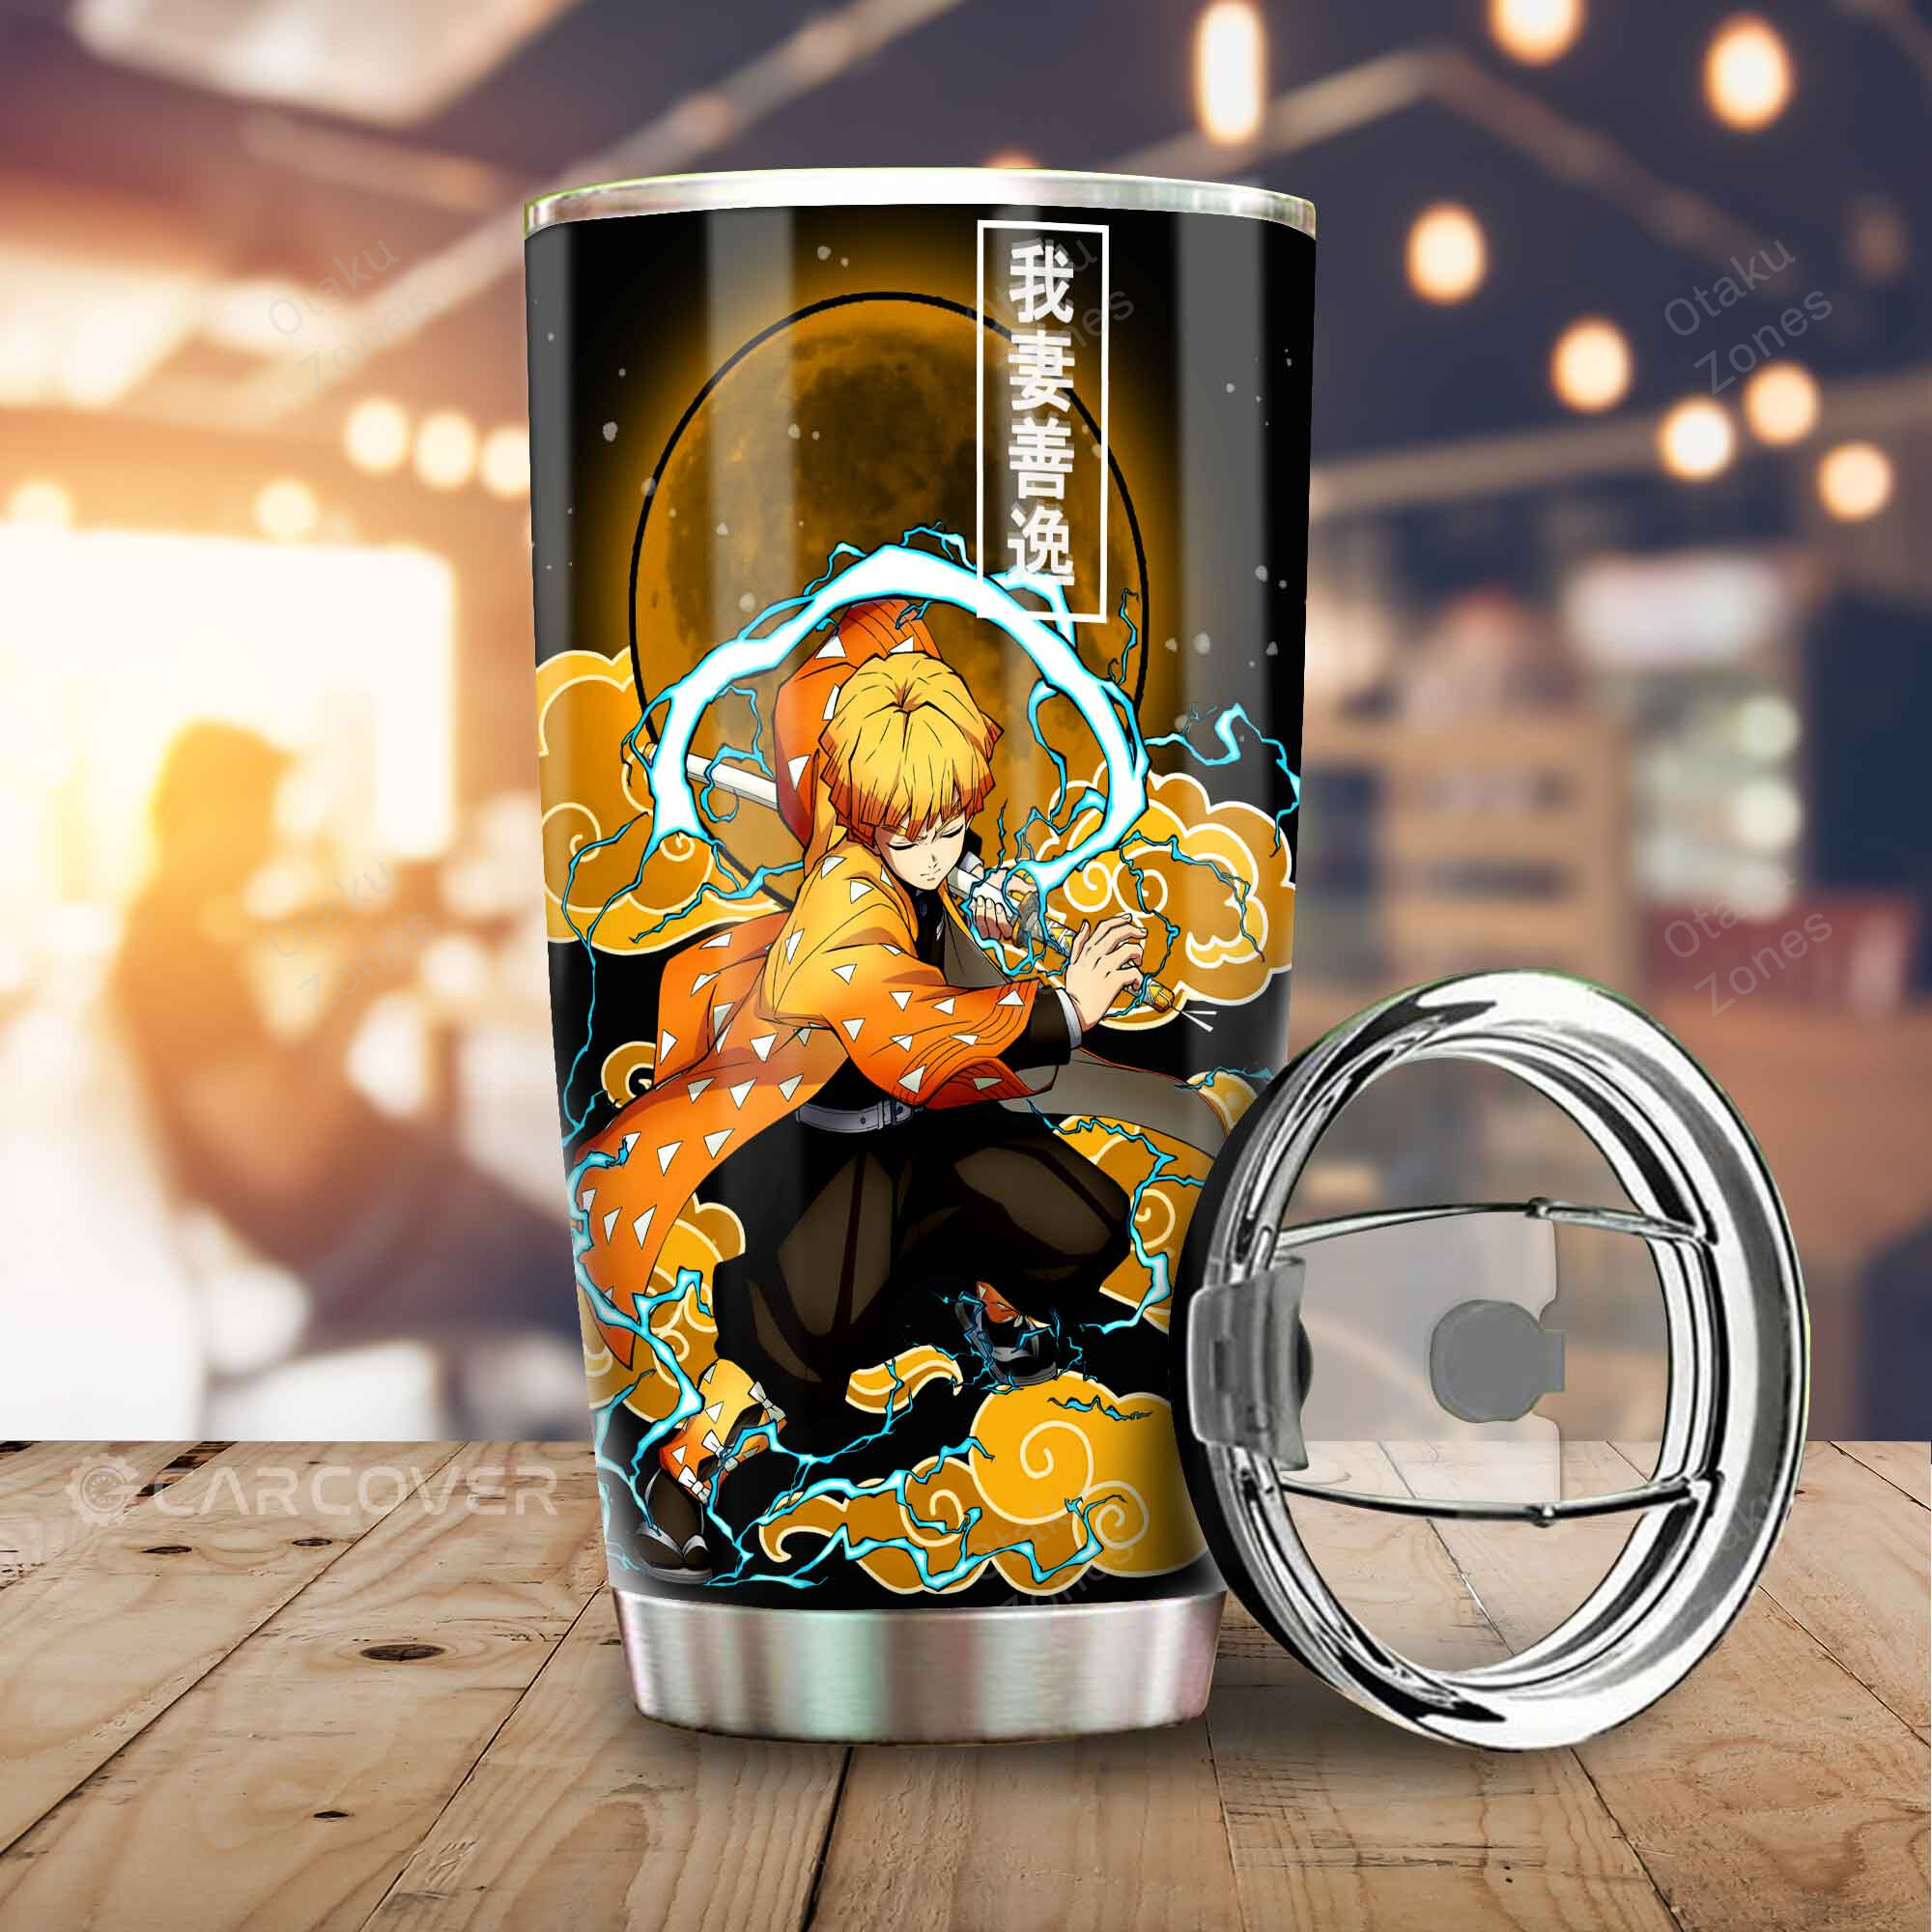 Show off your favorite Anime character in style with these products 13